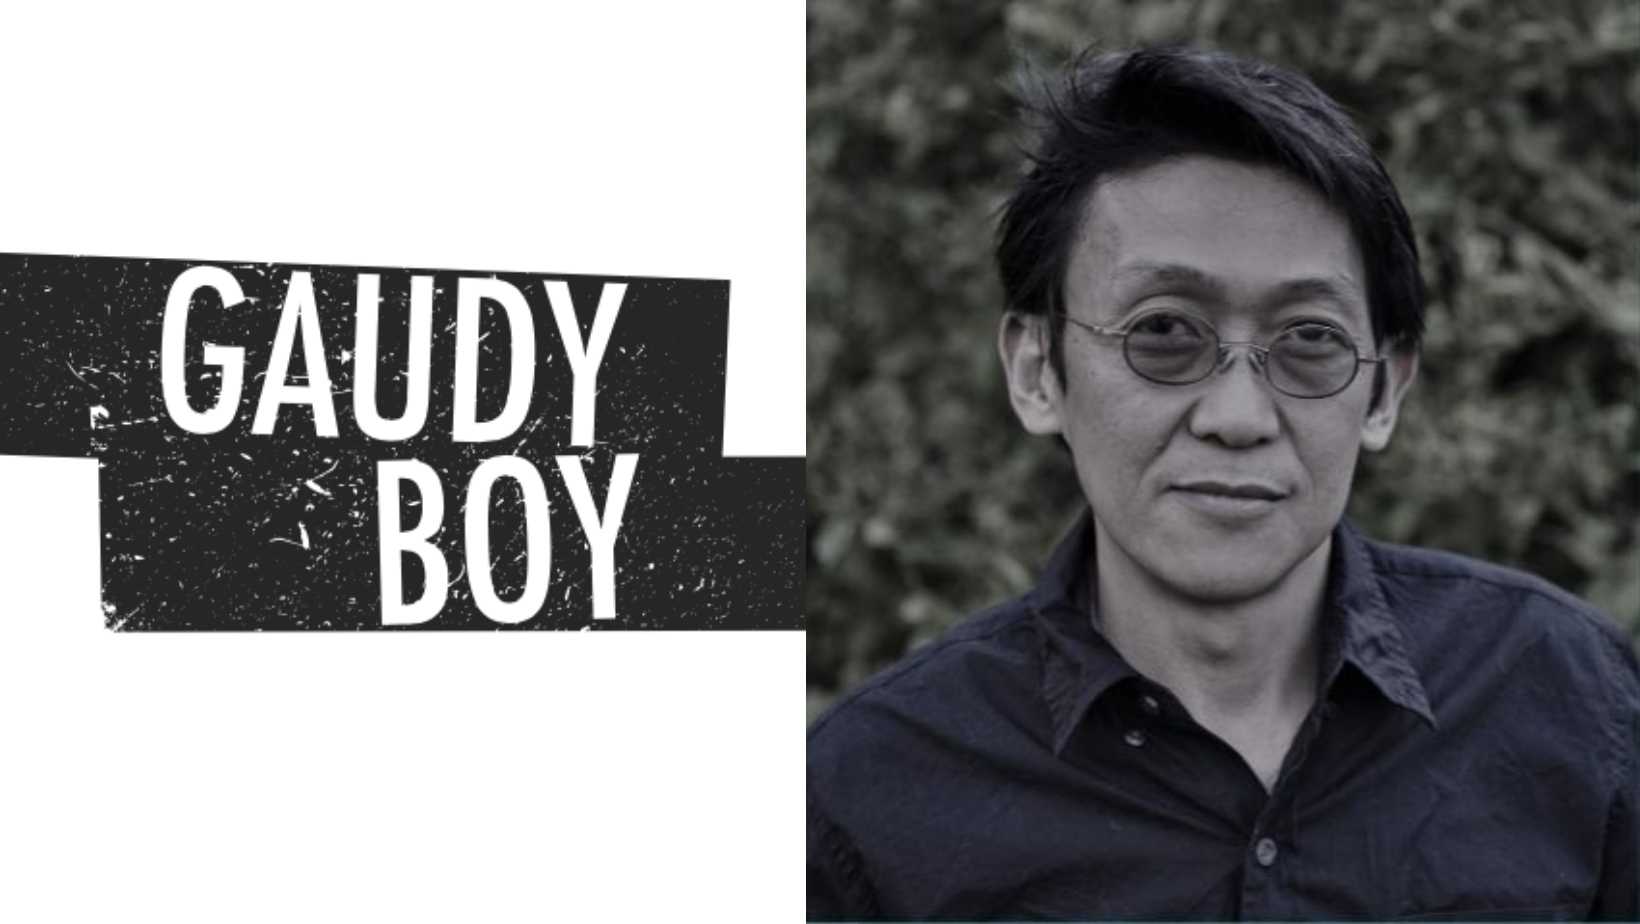  Jim Pascual Agustin Gaudy Boy Poetry Book Prize